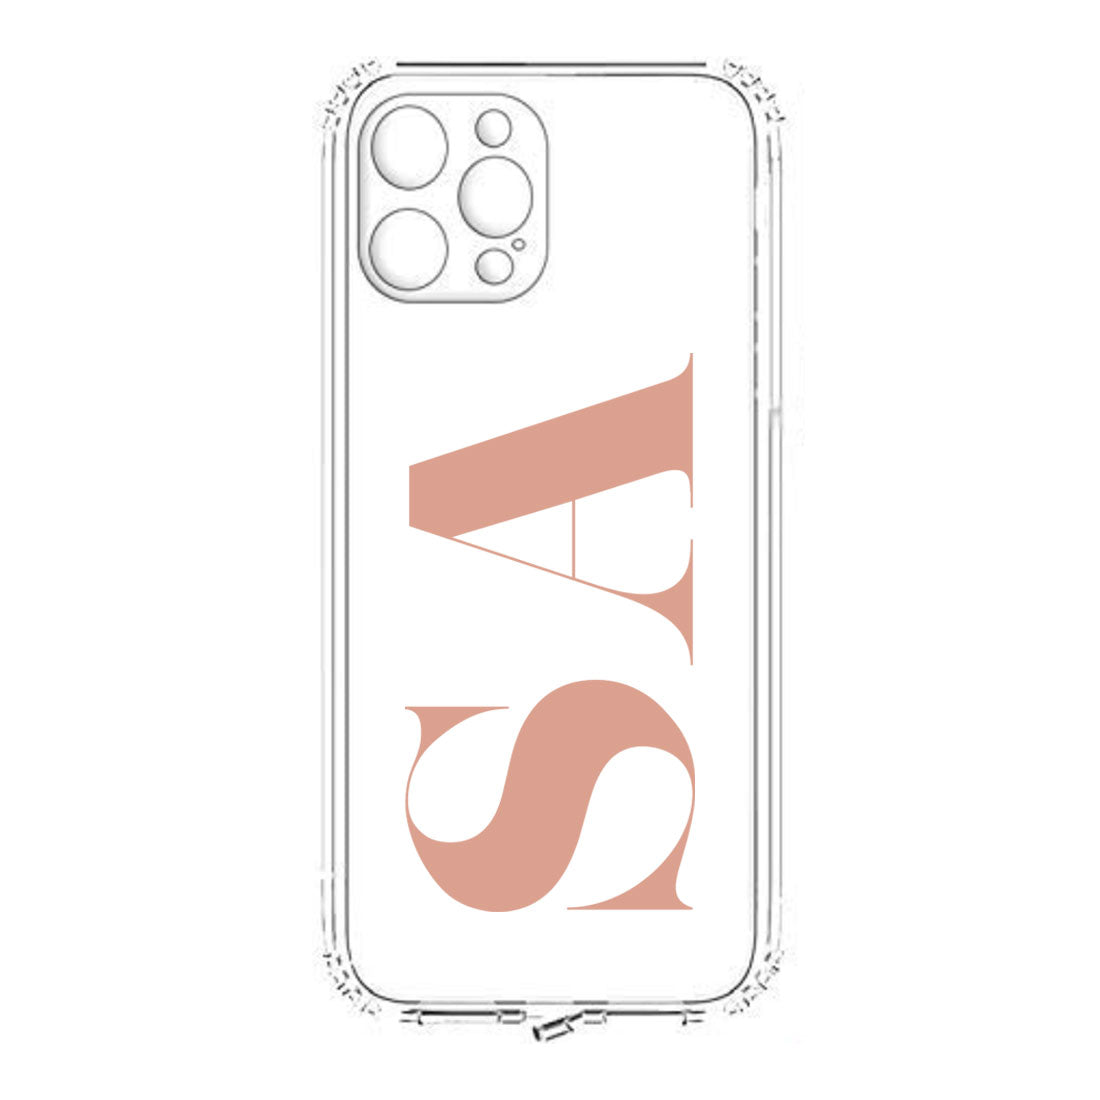 Personalized IPhone 11 Pro Back Case with Camera Protection Transparent Cases with Initial